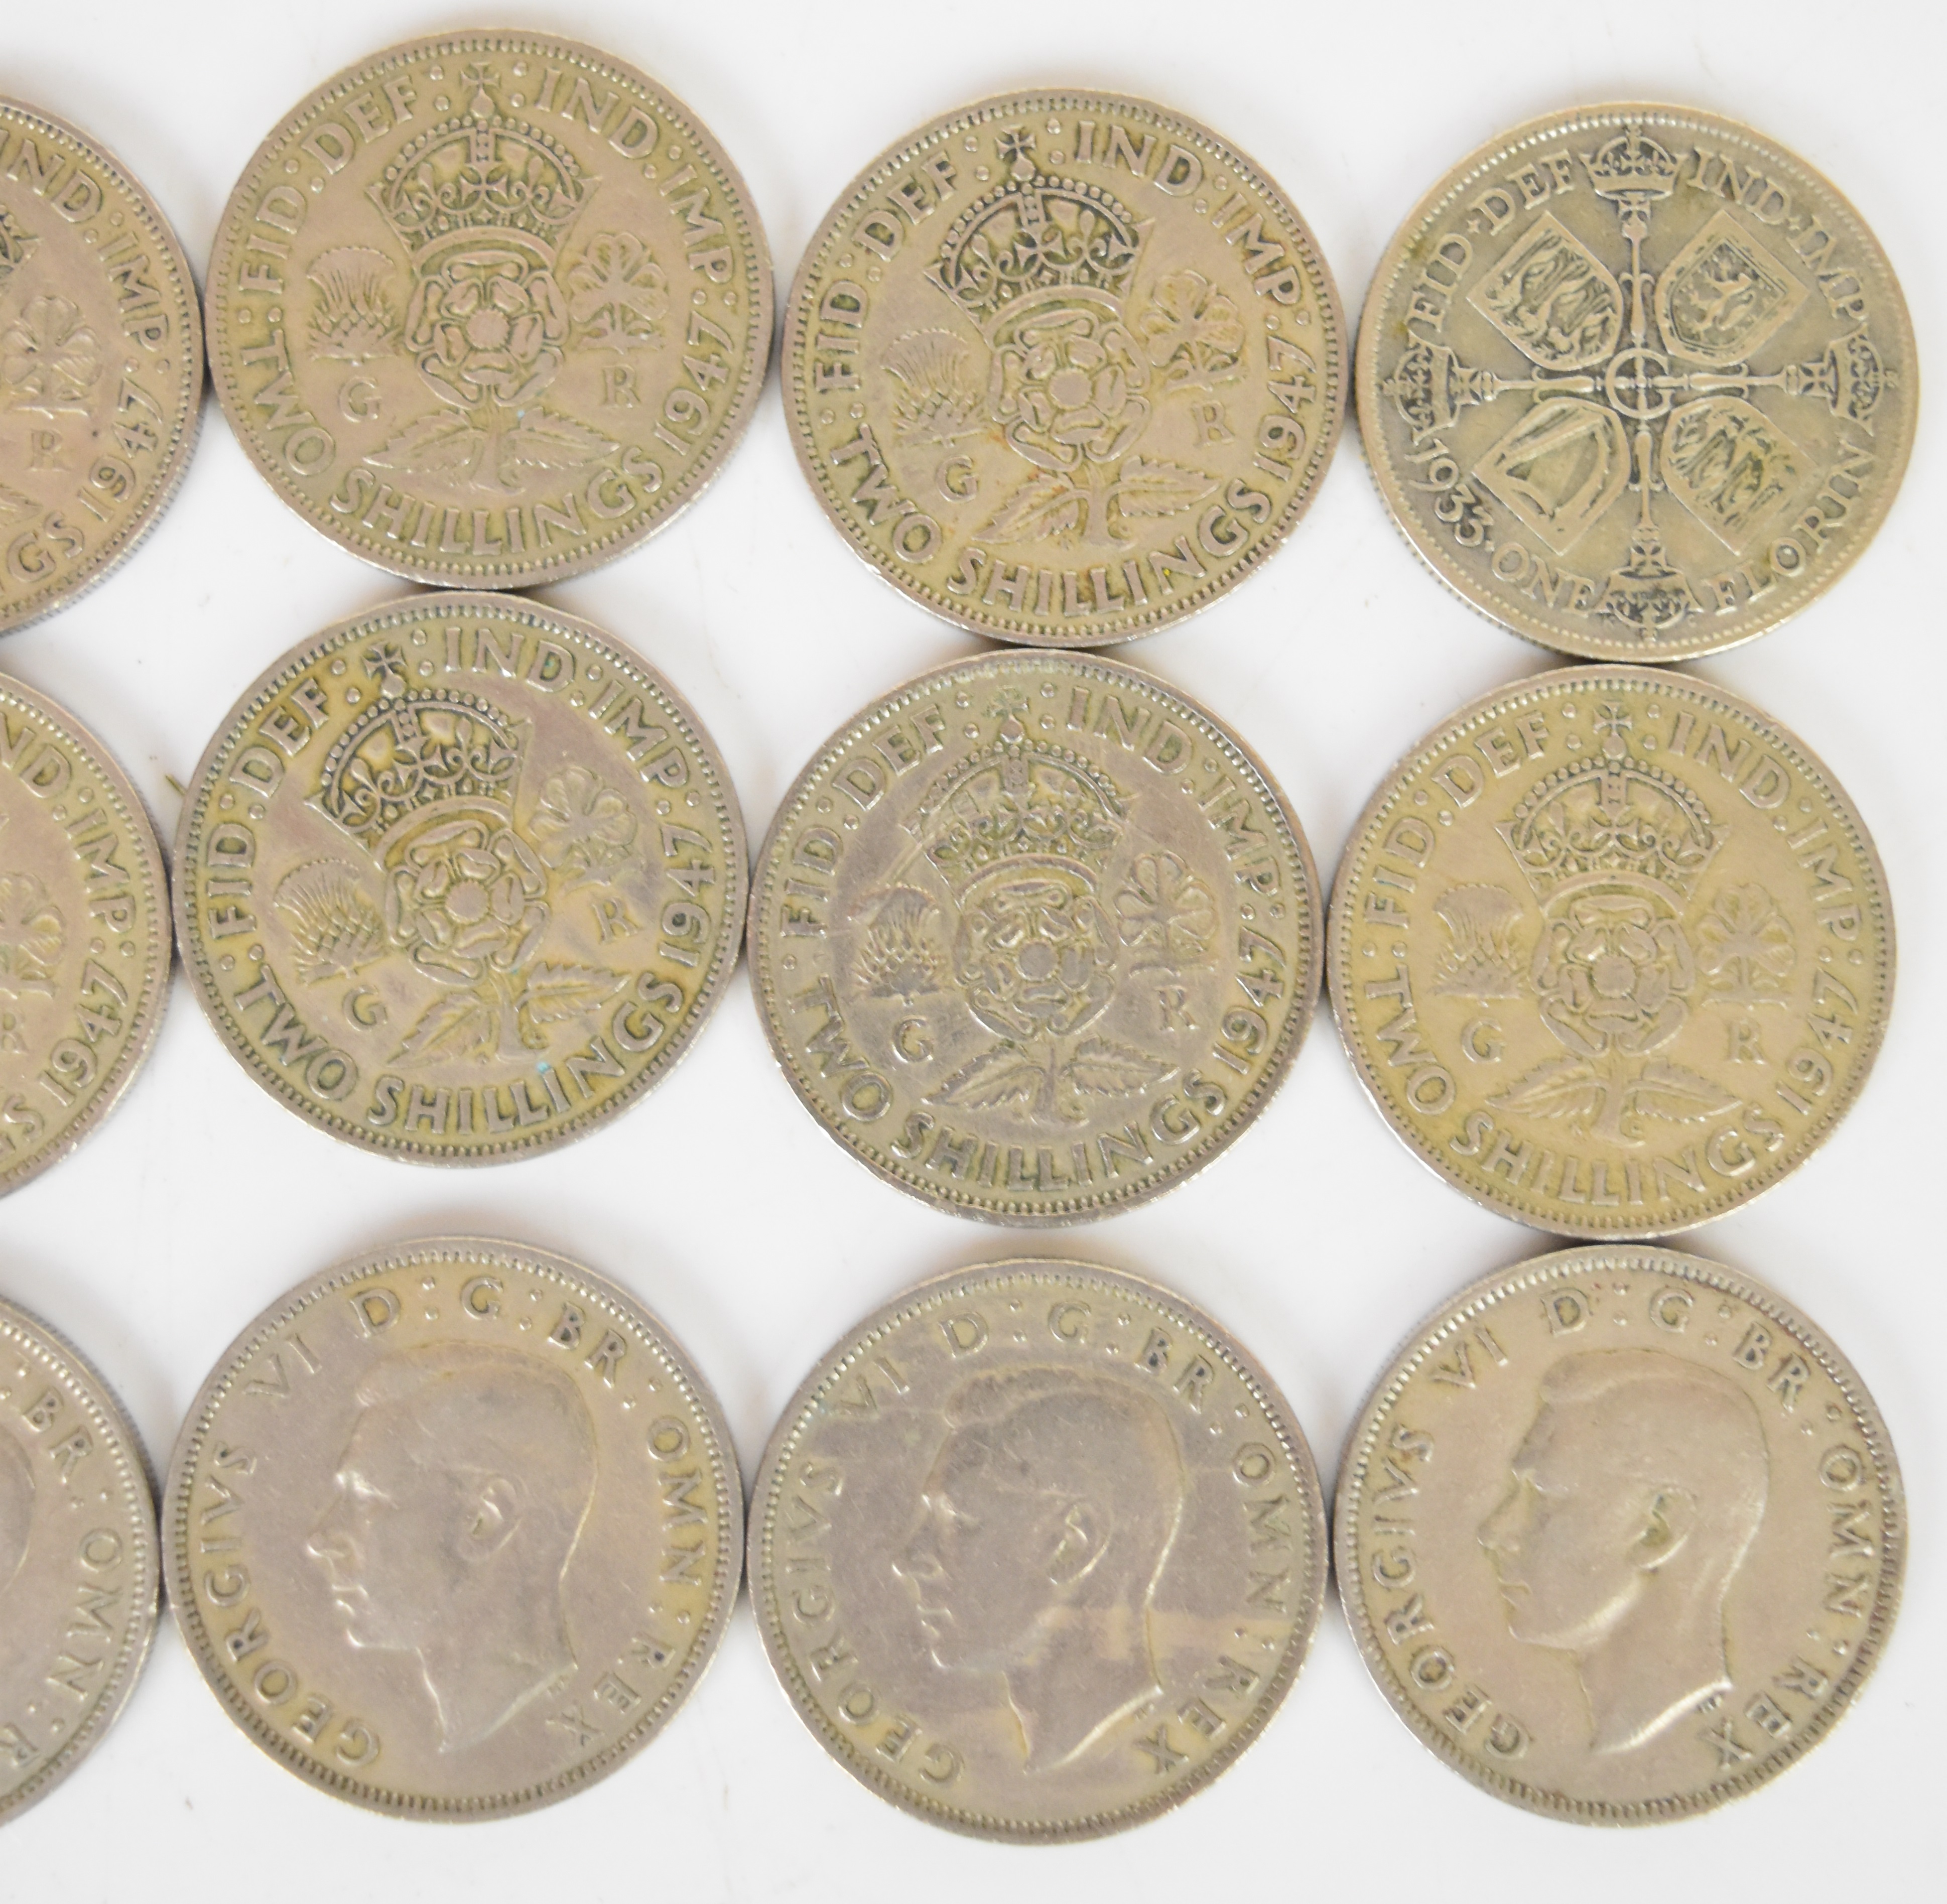 Approximately 1155g pre-1947 coinage and two pre-1947 florin / two shilling coins - Image 2 of 3